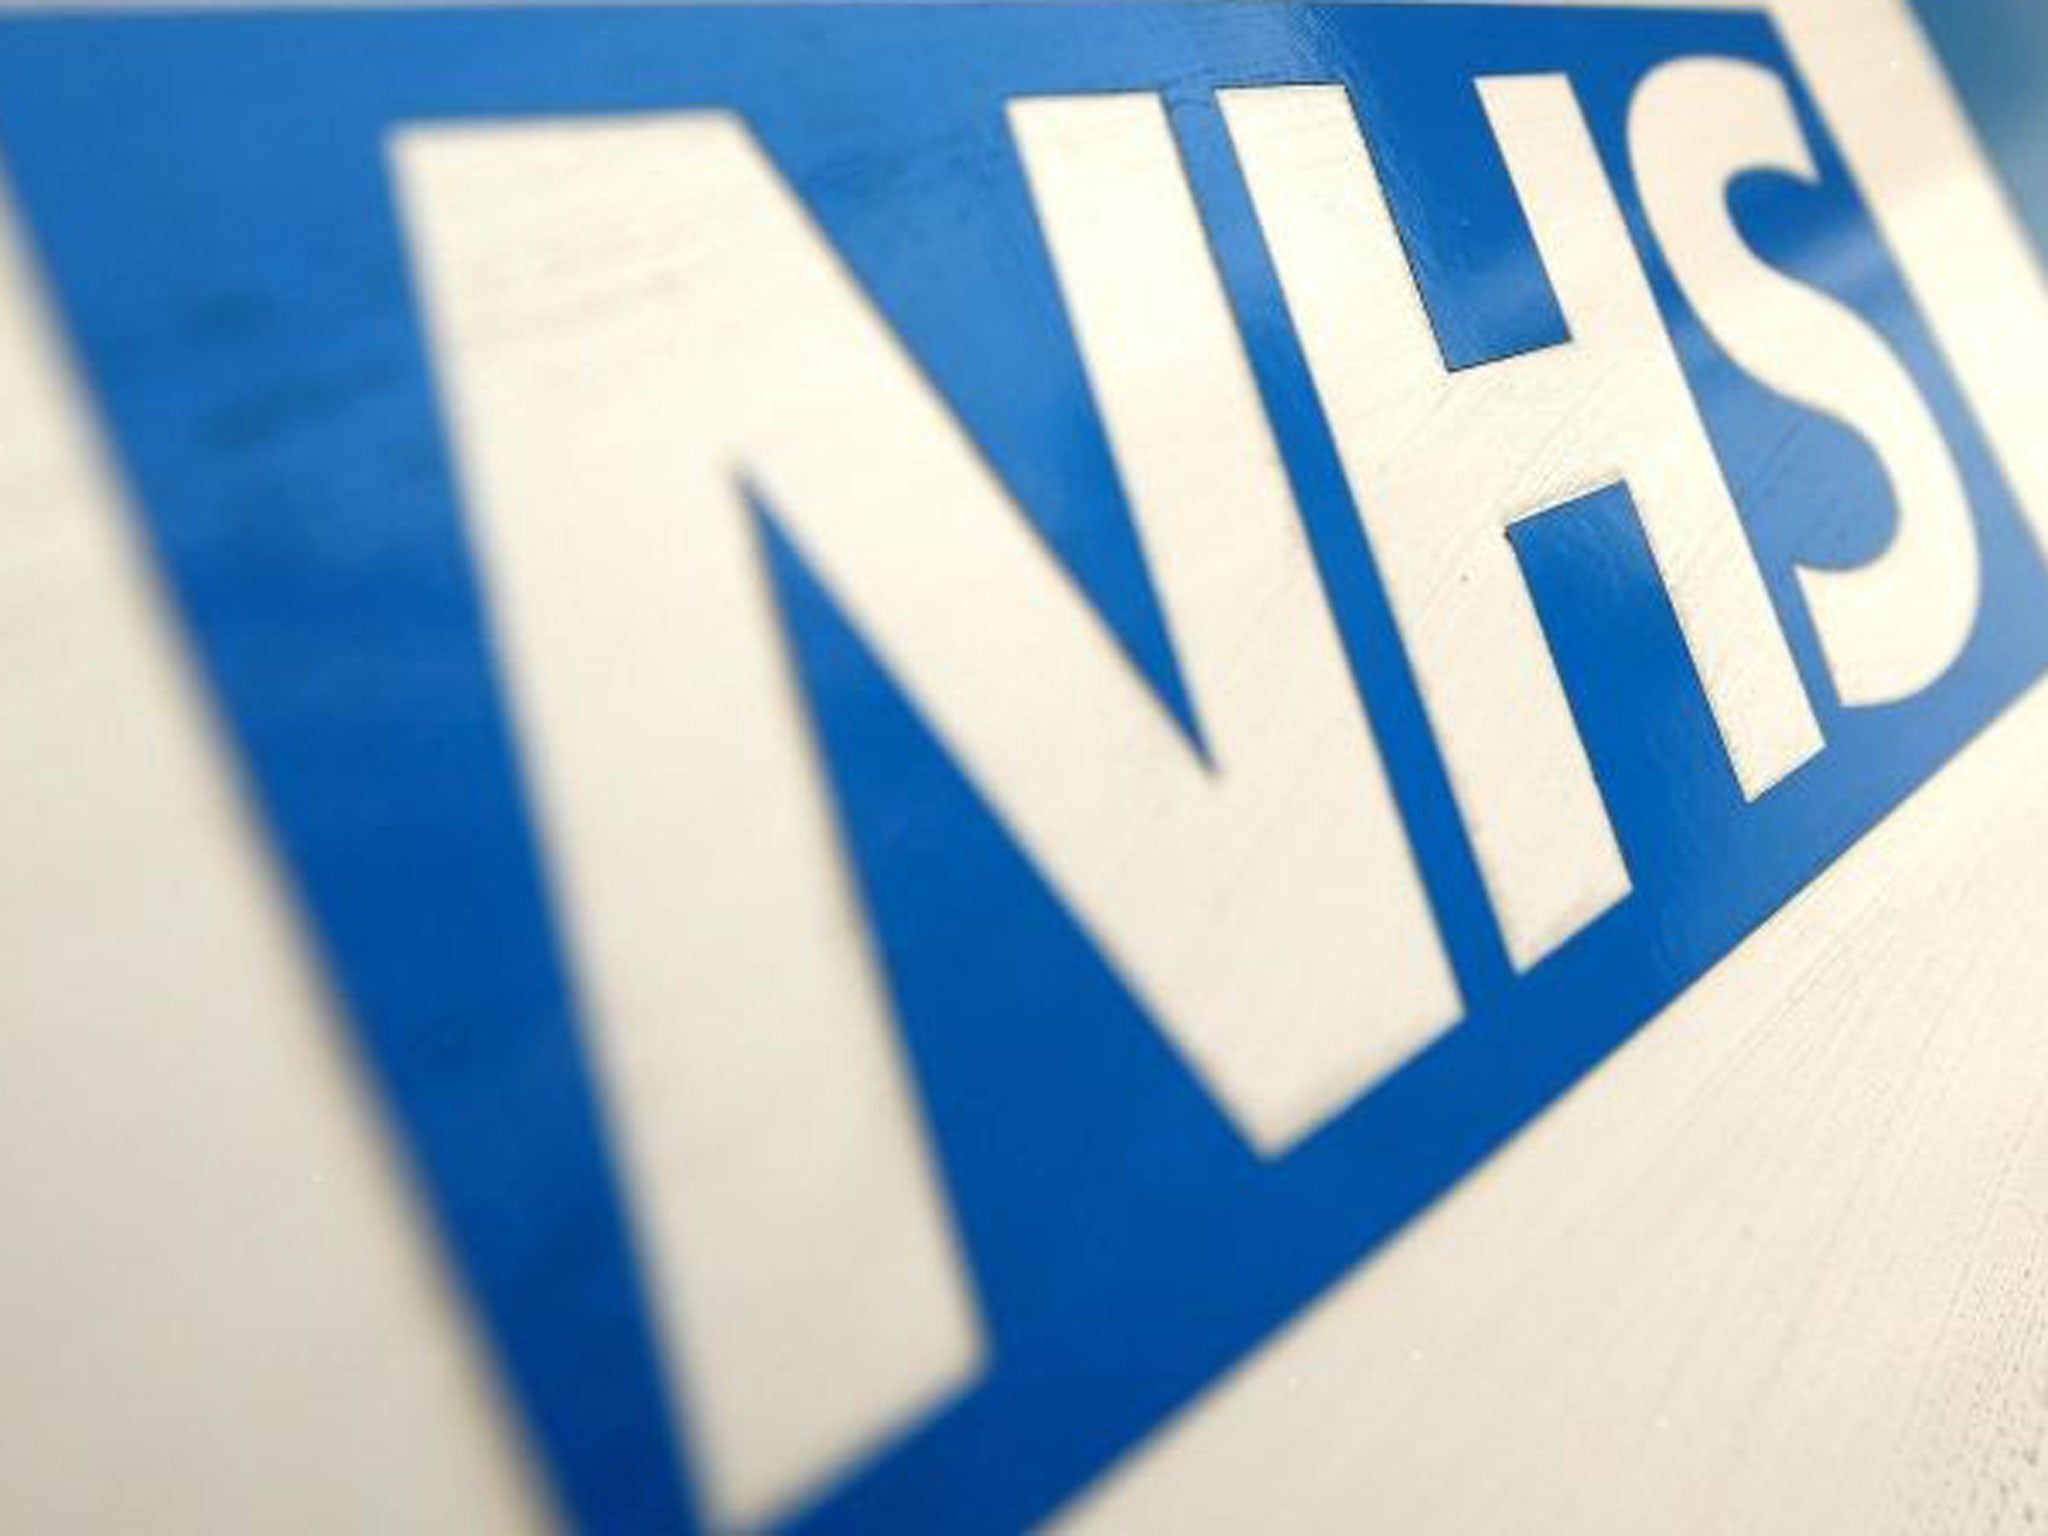 Hospital death rates should be ignored, according to the expert leading the review into NHS mortality rates